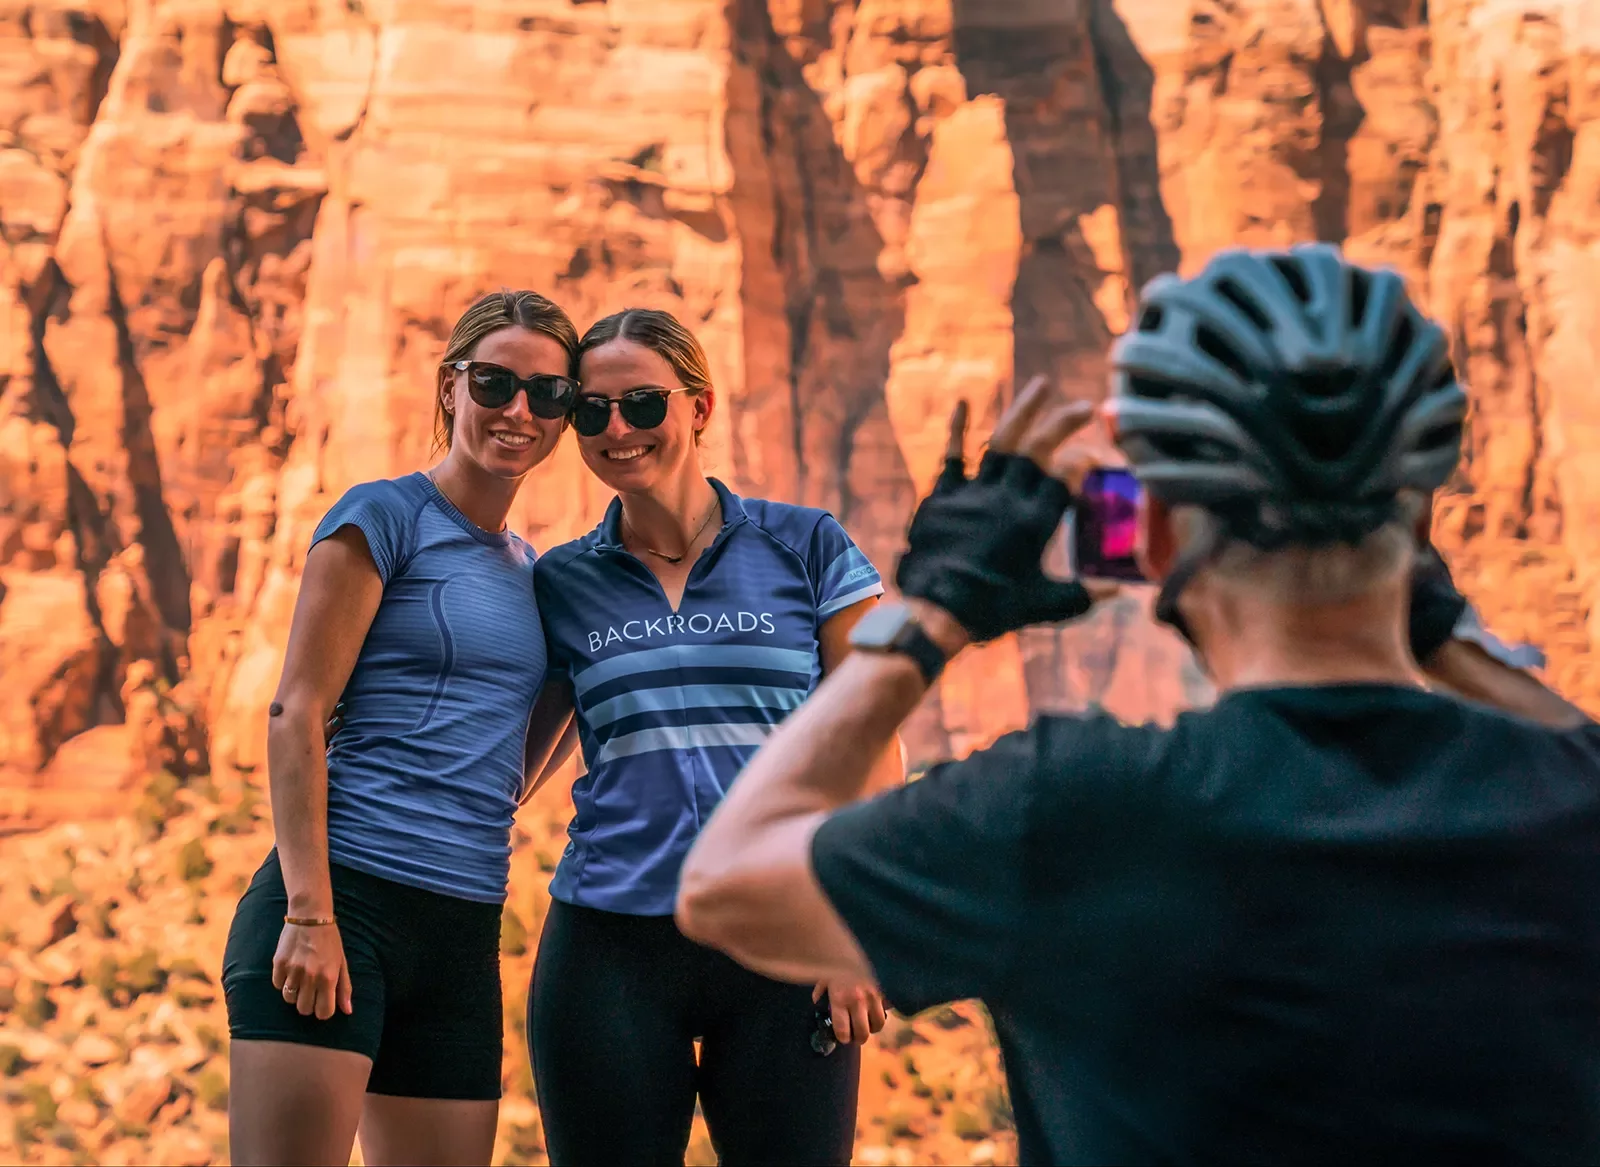 Guest taking photo of two others, all in bike gear, orange cliffs behind them.